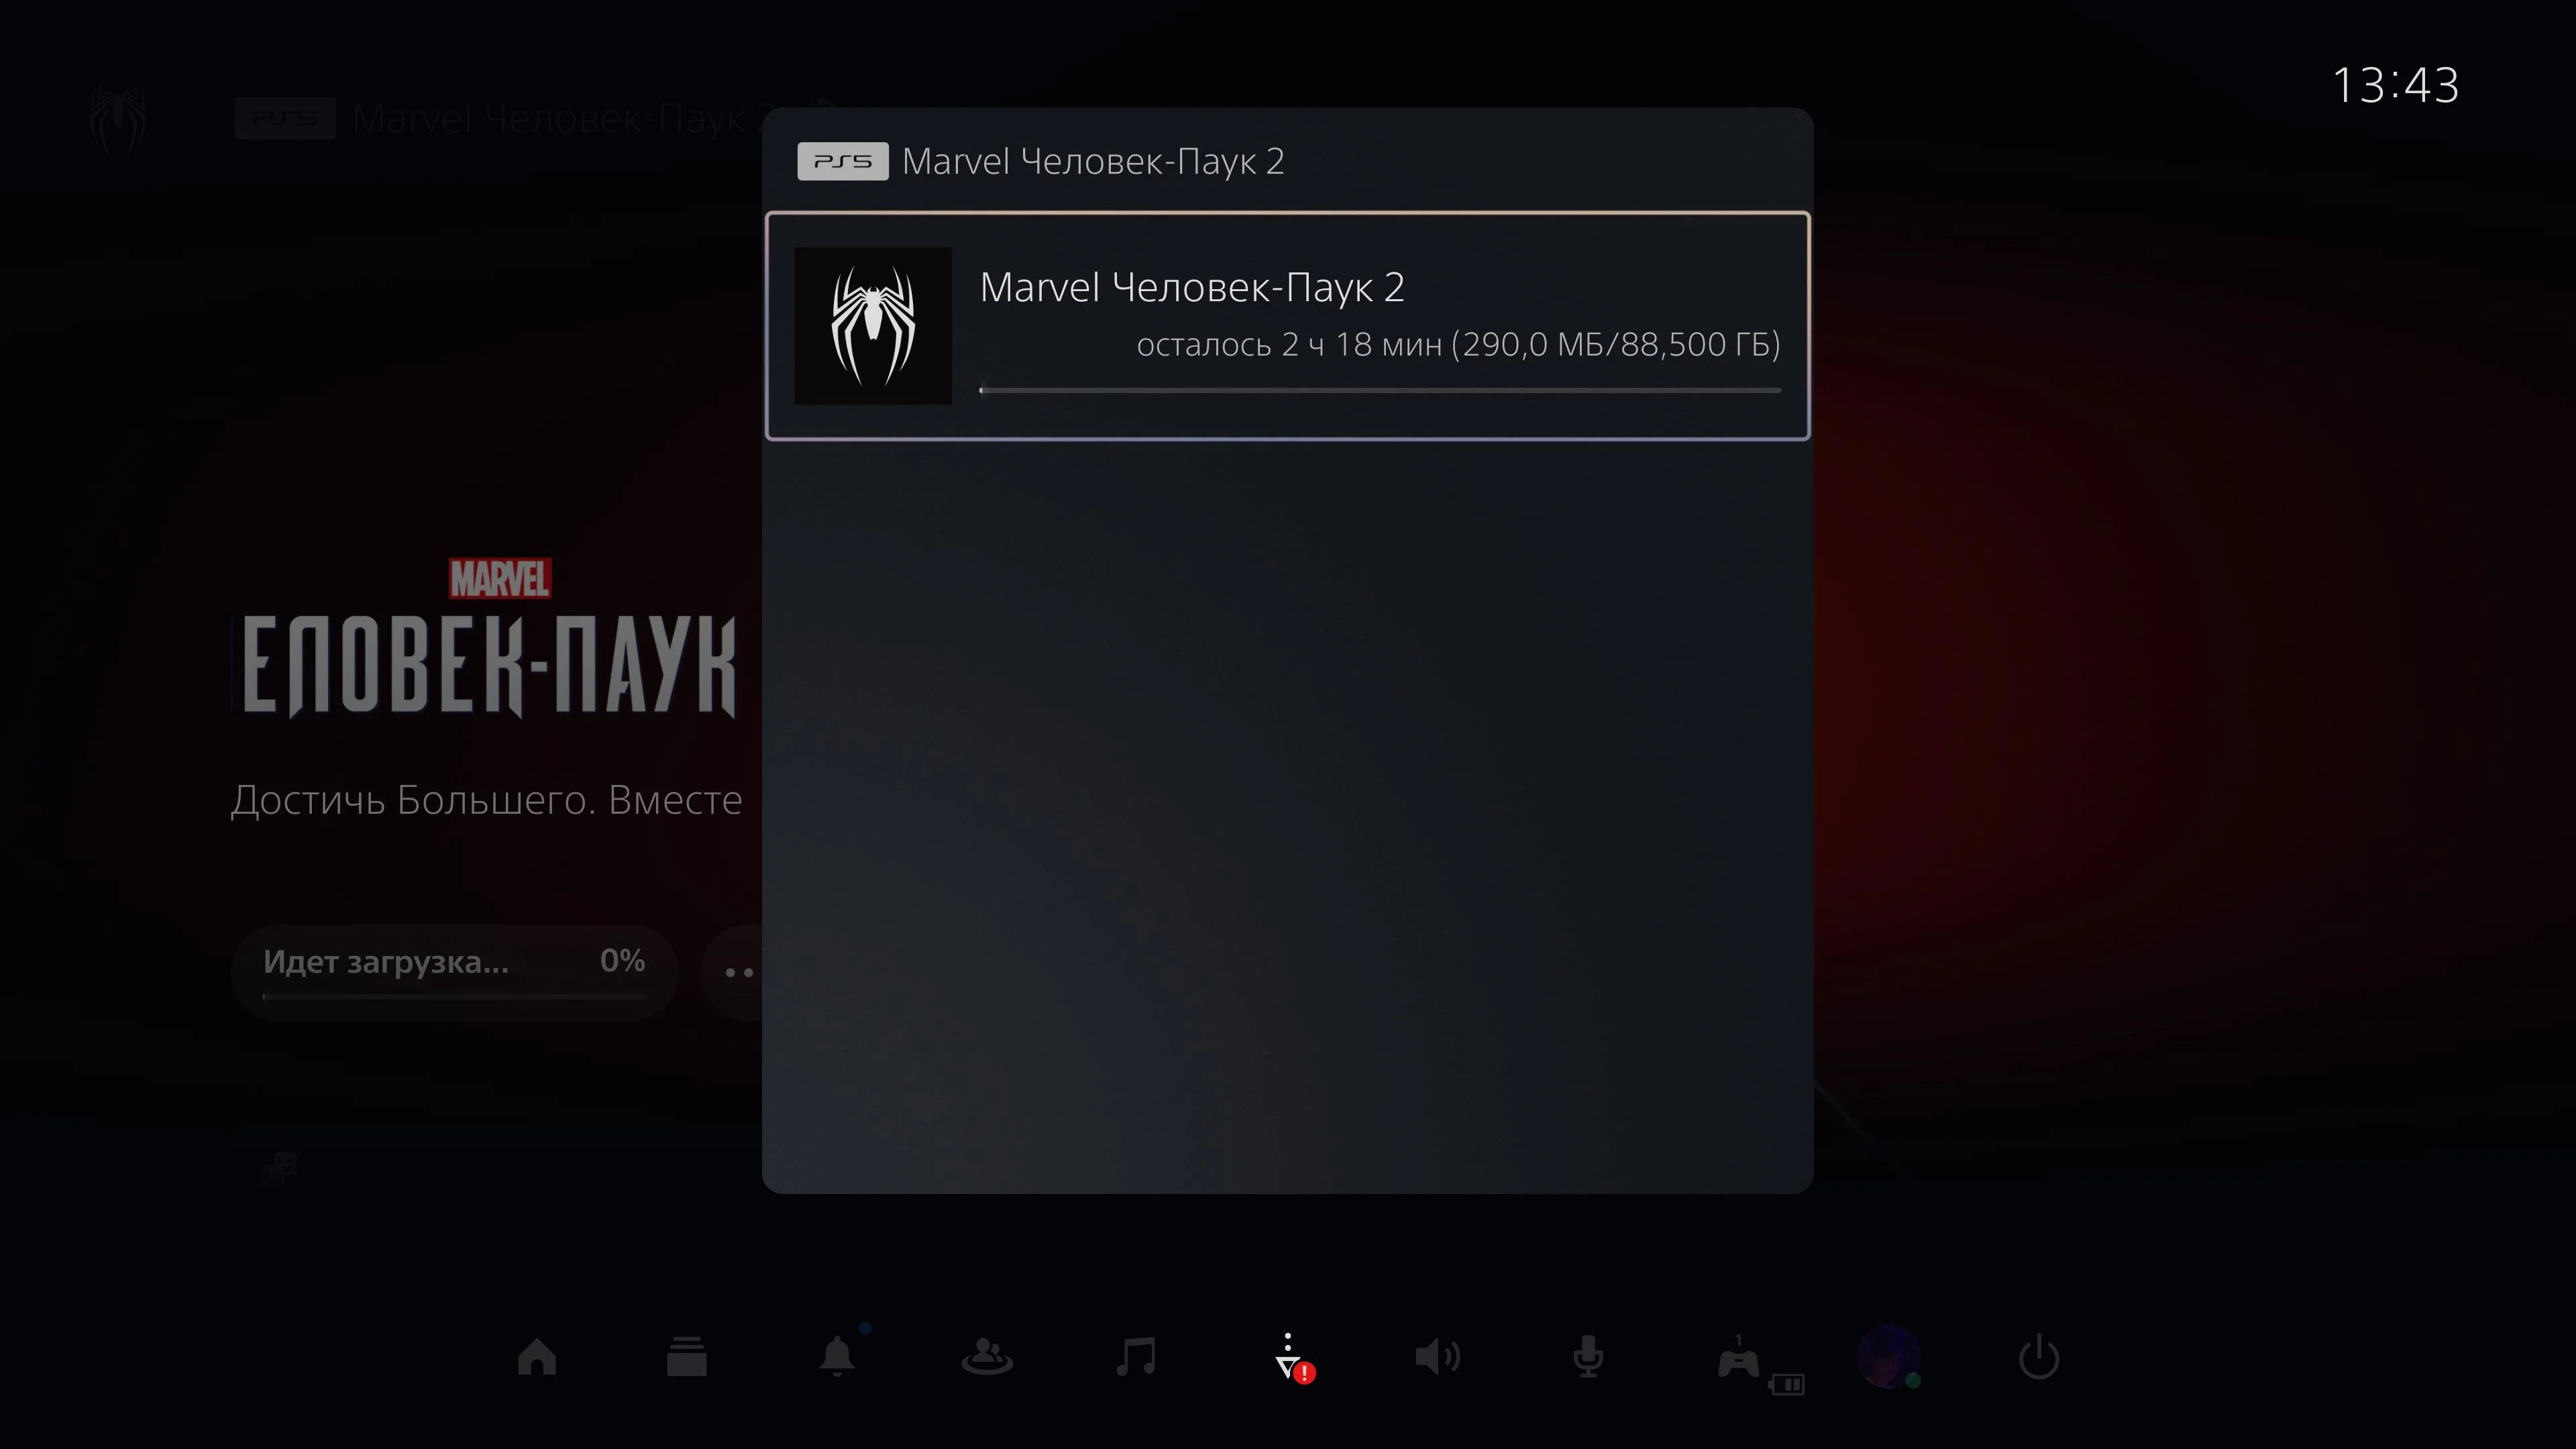 Pre-loading of Marvel's Spider-Man 2 has started on PlayStation 5